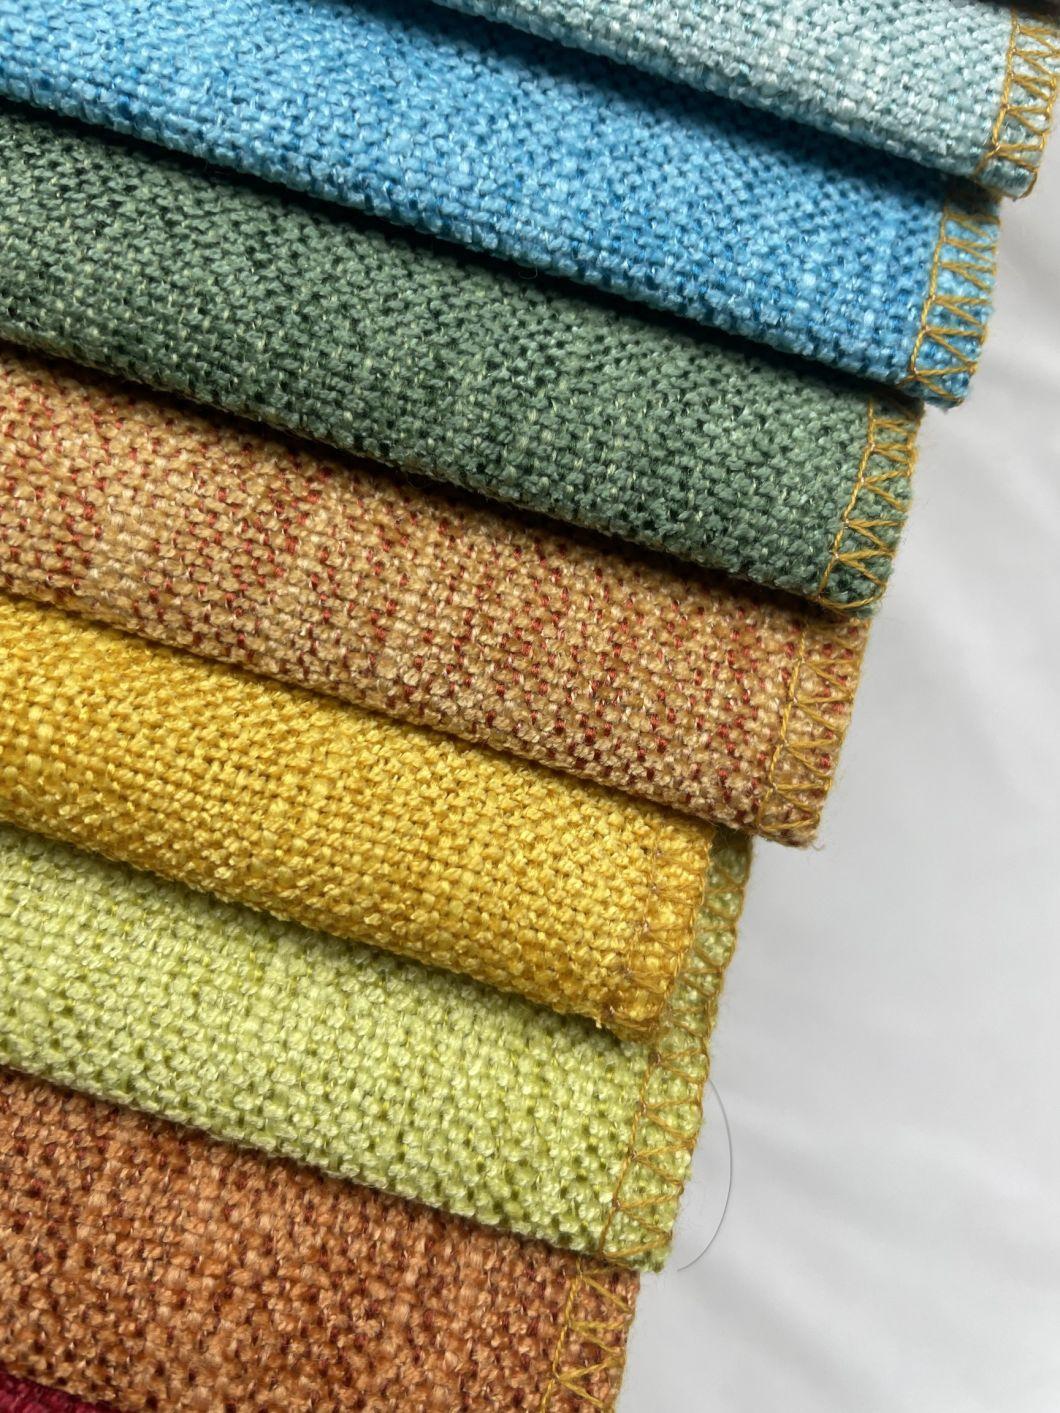 Sofa Upholstery Polyester Fabric145cm Width 100% Polyester Knitted Chenille Sofa Fabric Jacquard Sofa Upholstery Fabric for Sofa